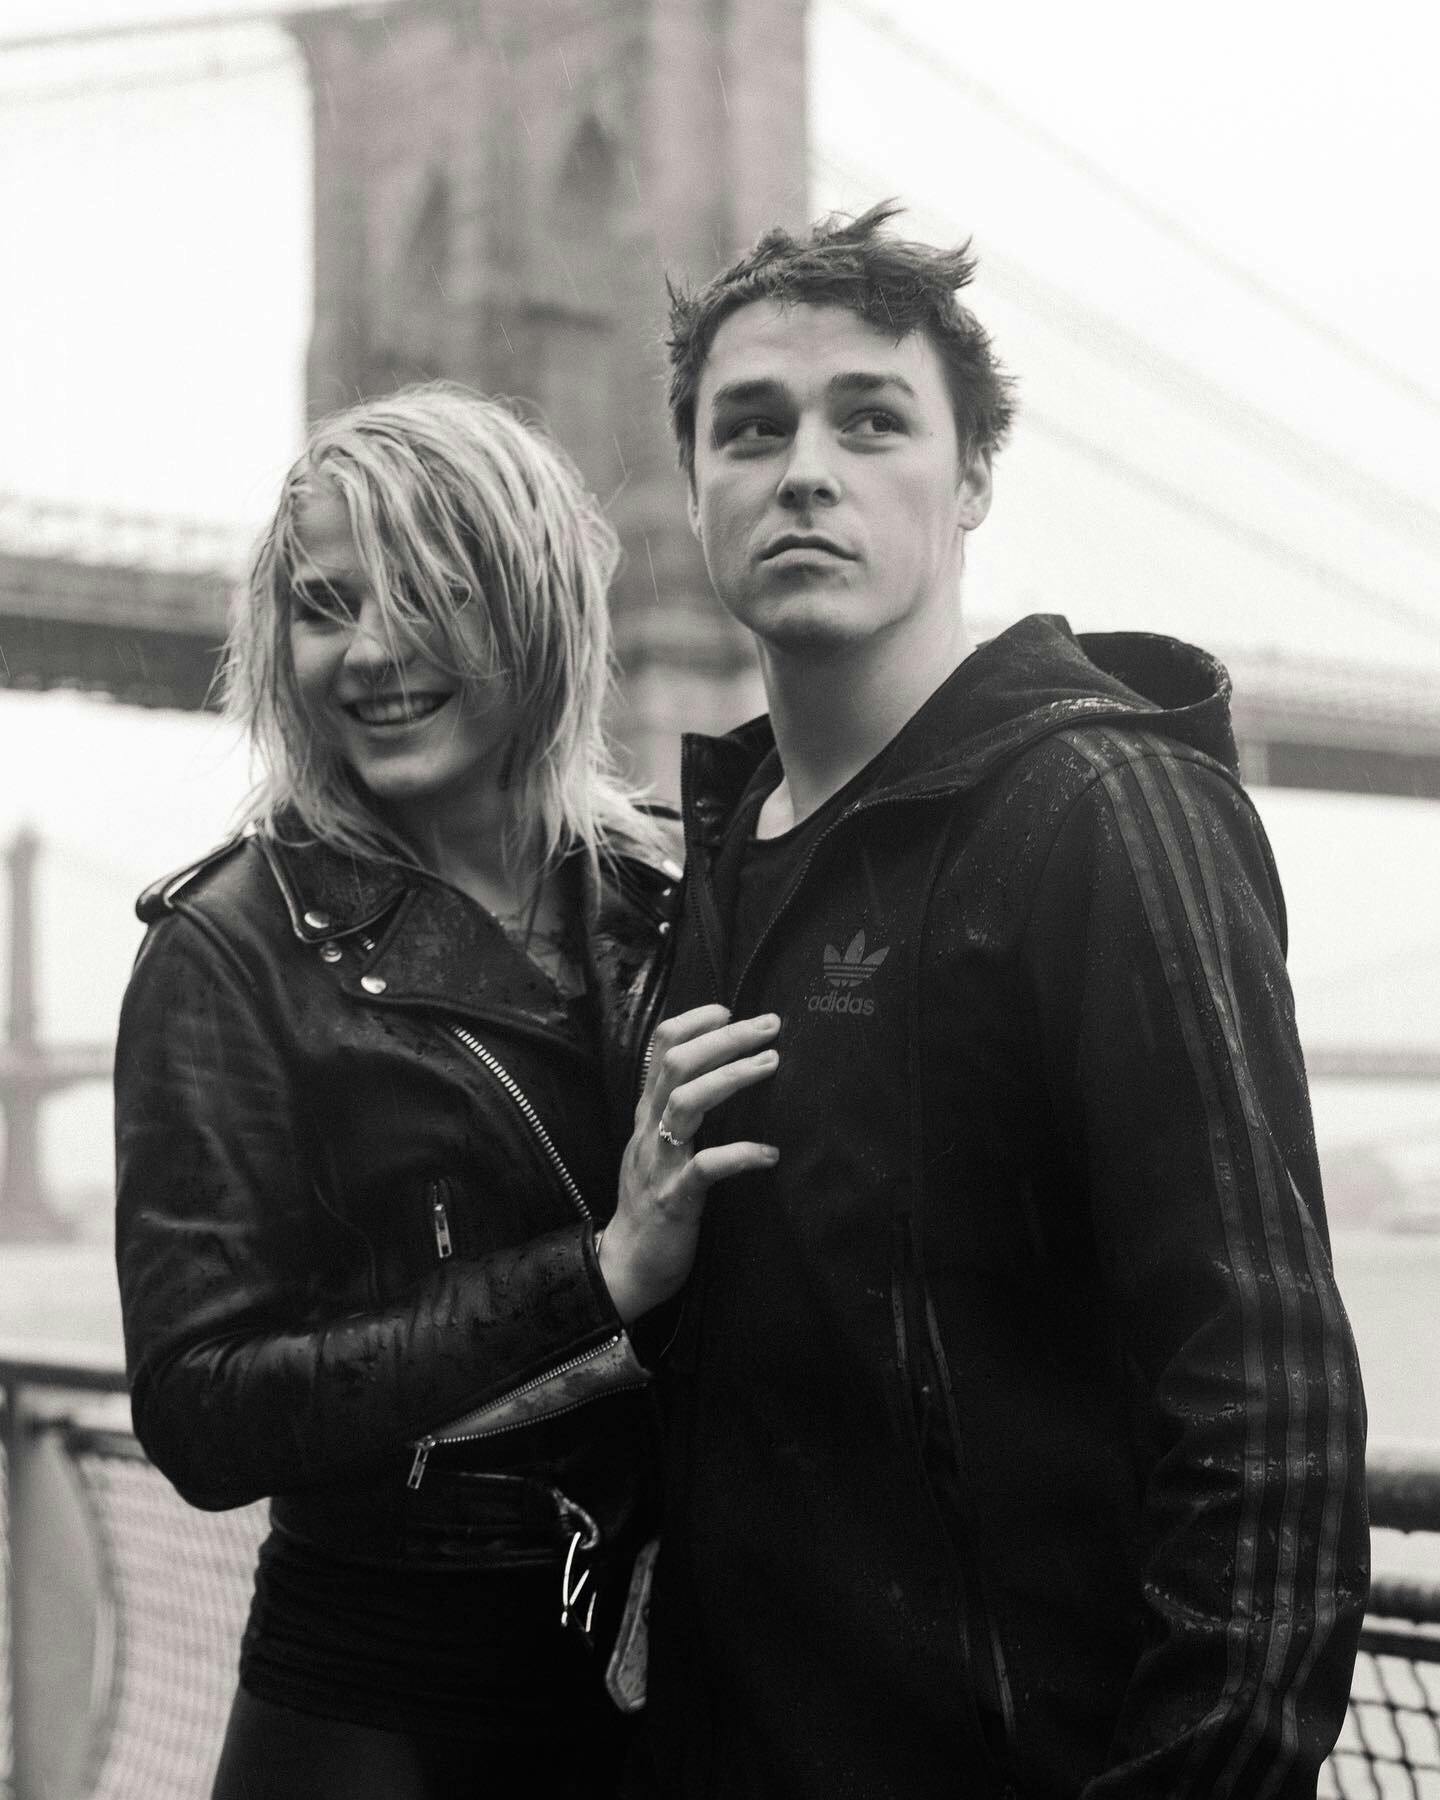 A young woman and man standing in front of a bridge, both with wet hair and leather jackets.